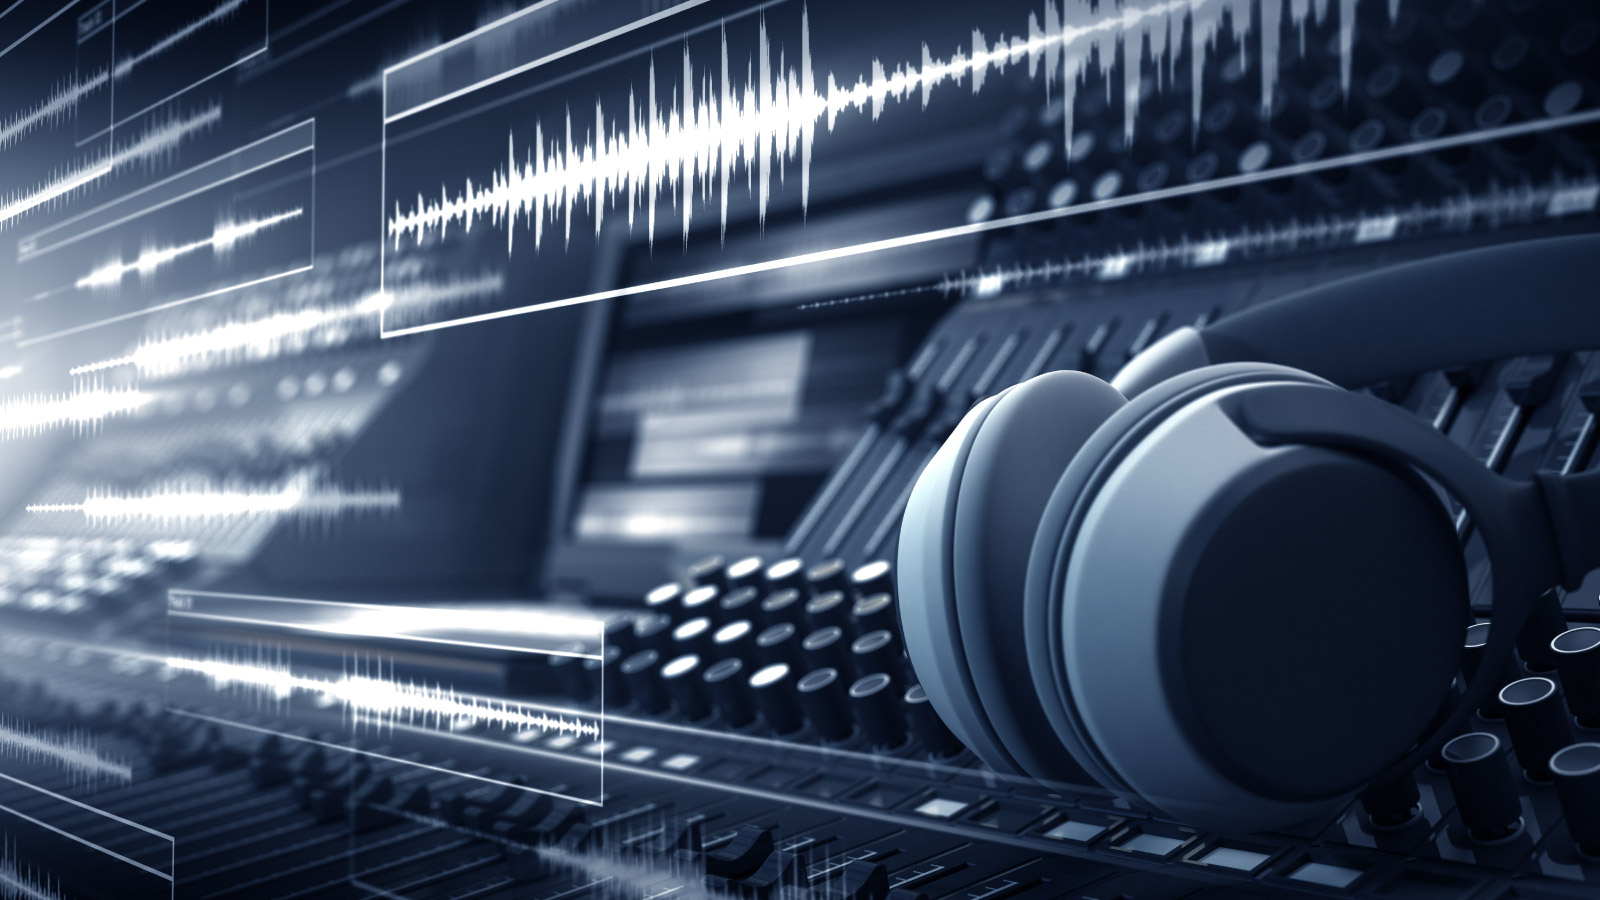 Sound Waveforms And Experimental Music Studio - Royalty Free Music Studio - HD Wallpaper 